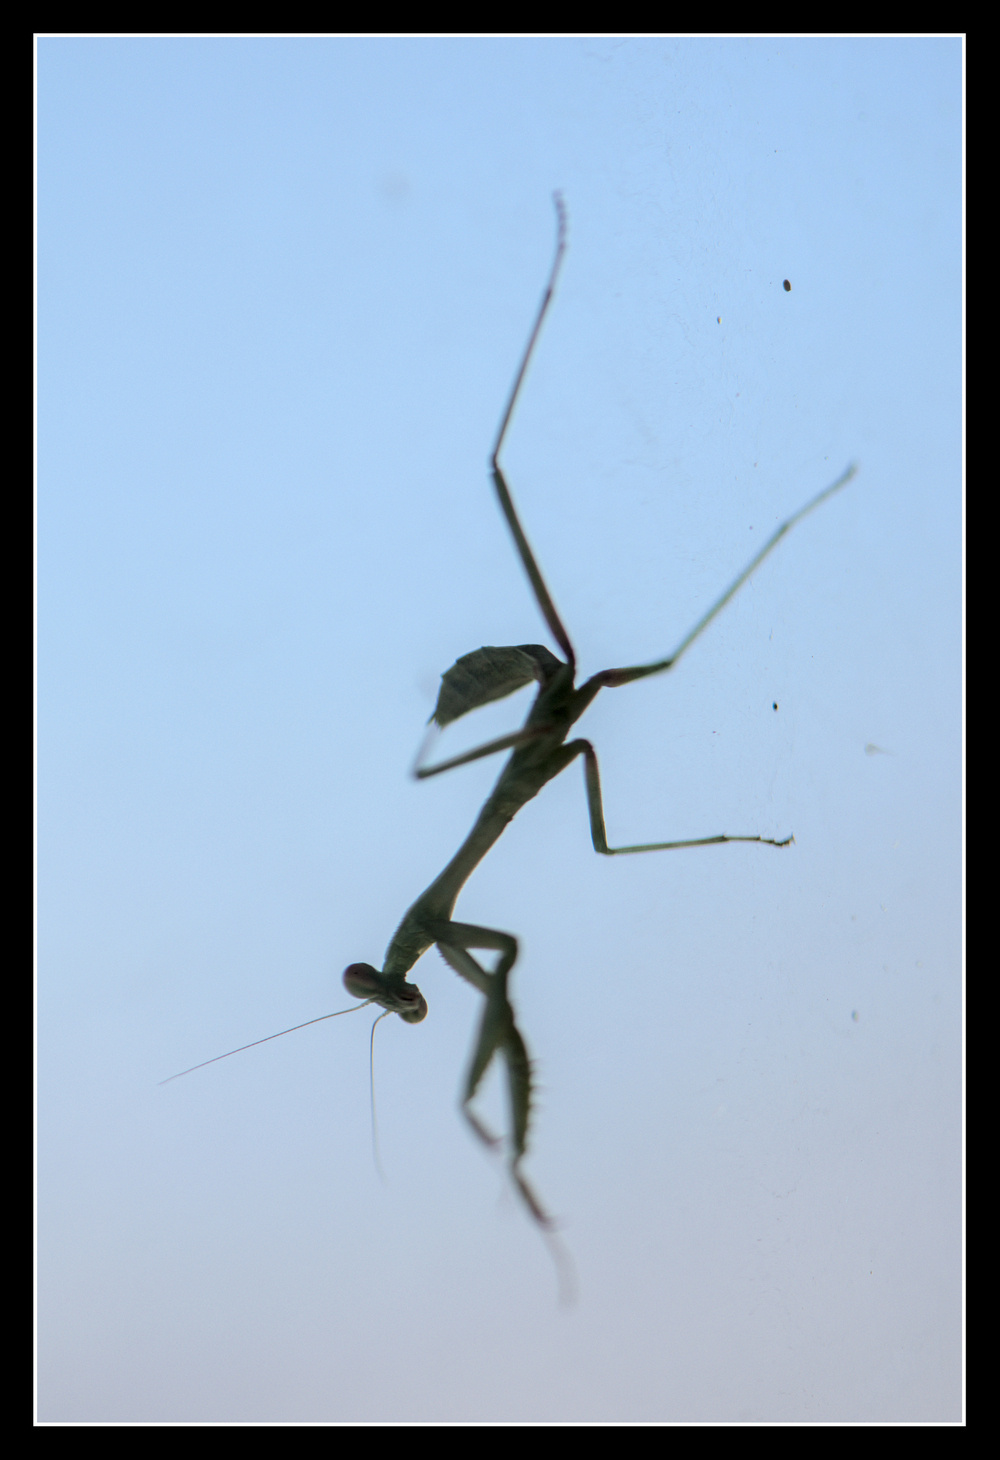 A praying mantis clings to a window.